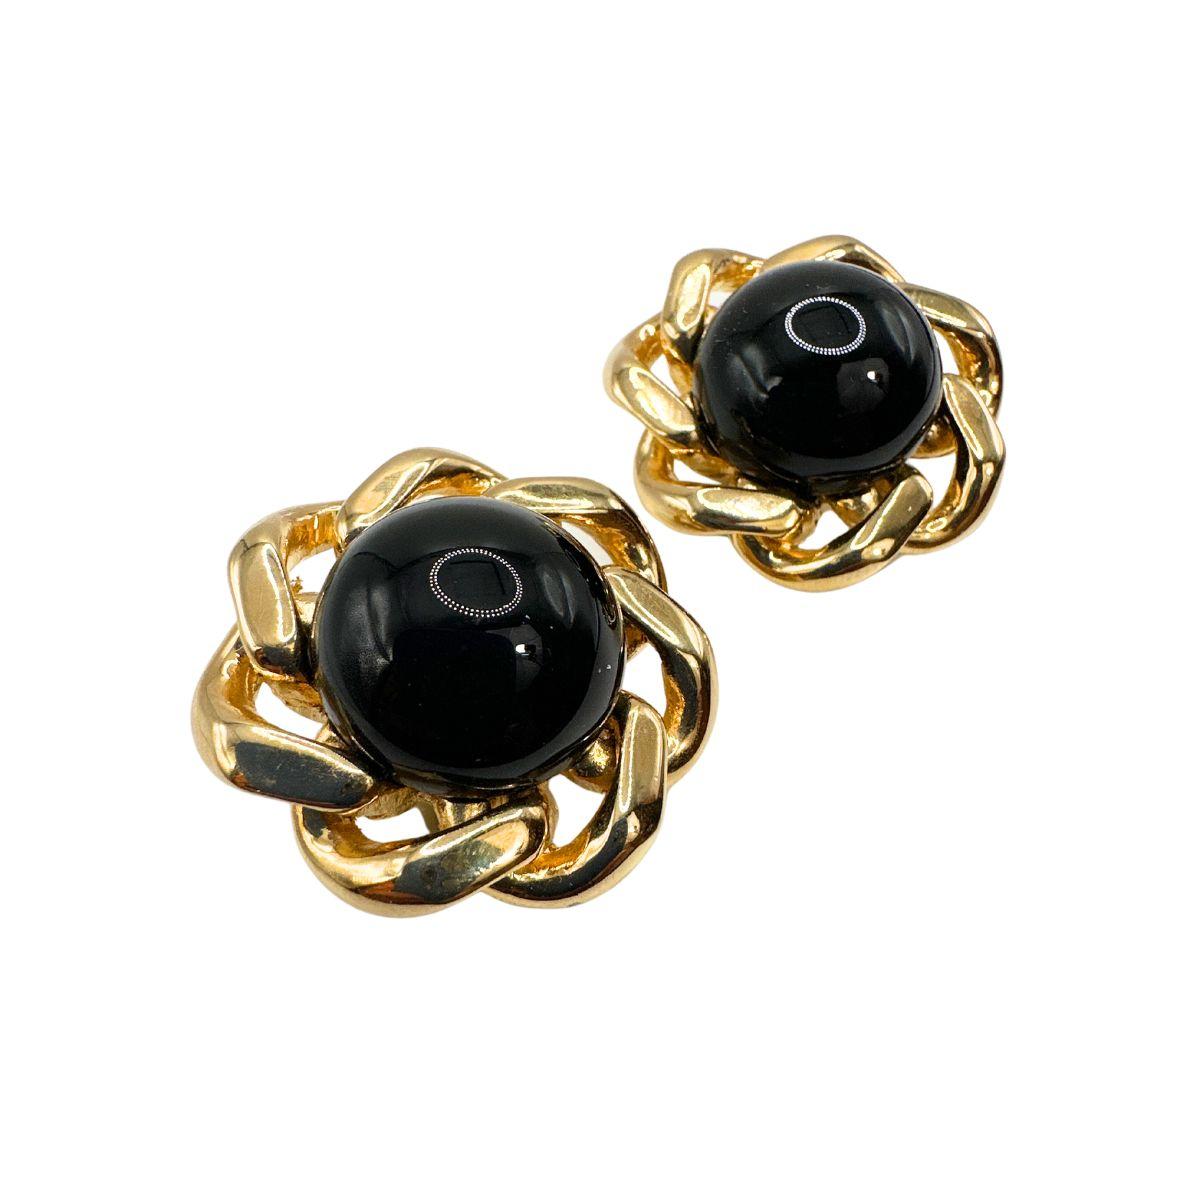 Earring Length: 1.33″

Bin Code: E5 / P2

Enhance your elegance and grace with these Vintage Signed Ciner Black Cabochon Glass Flower Shape Earrings. Crafted with exquisite attention to detail, these earrings feature a captivating flower design